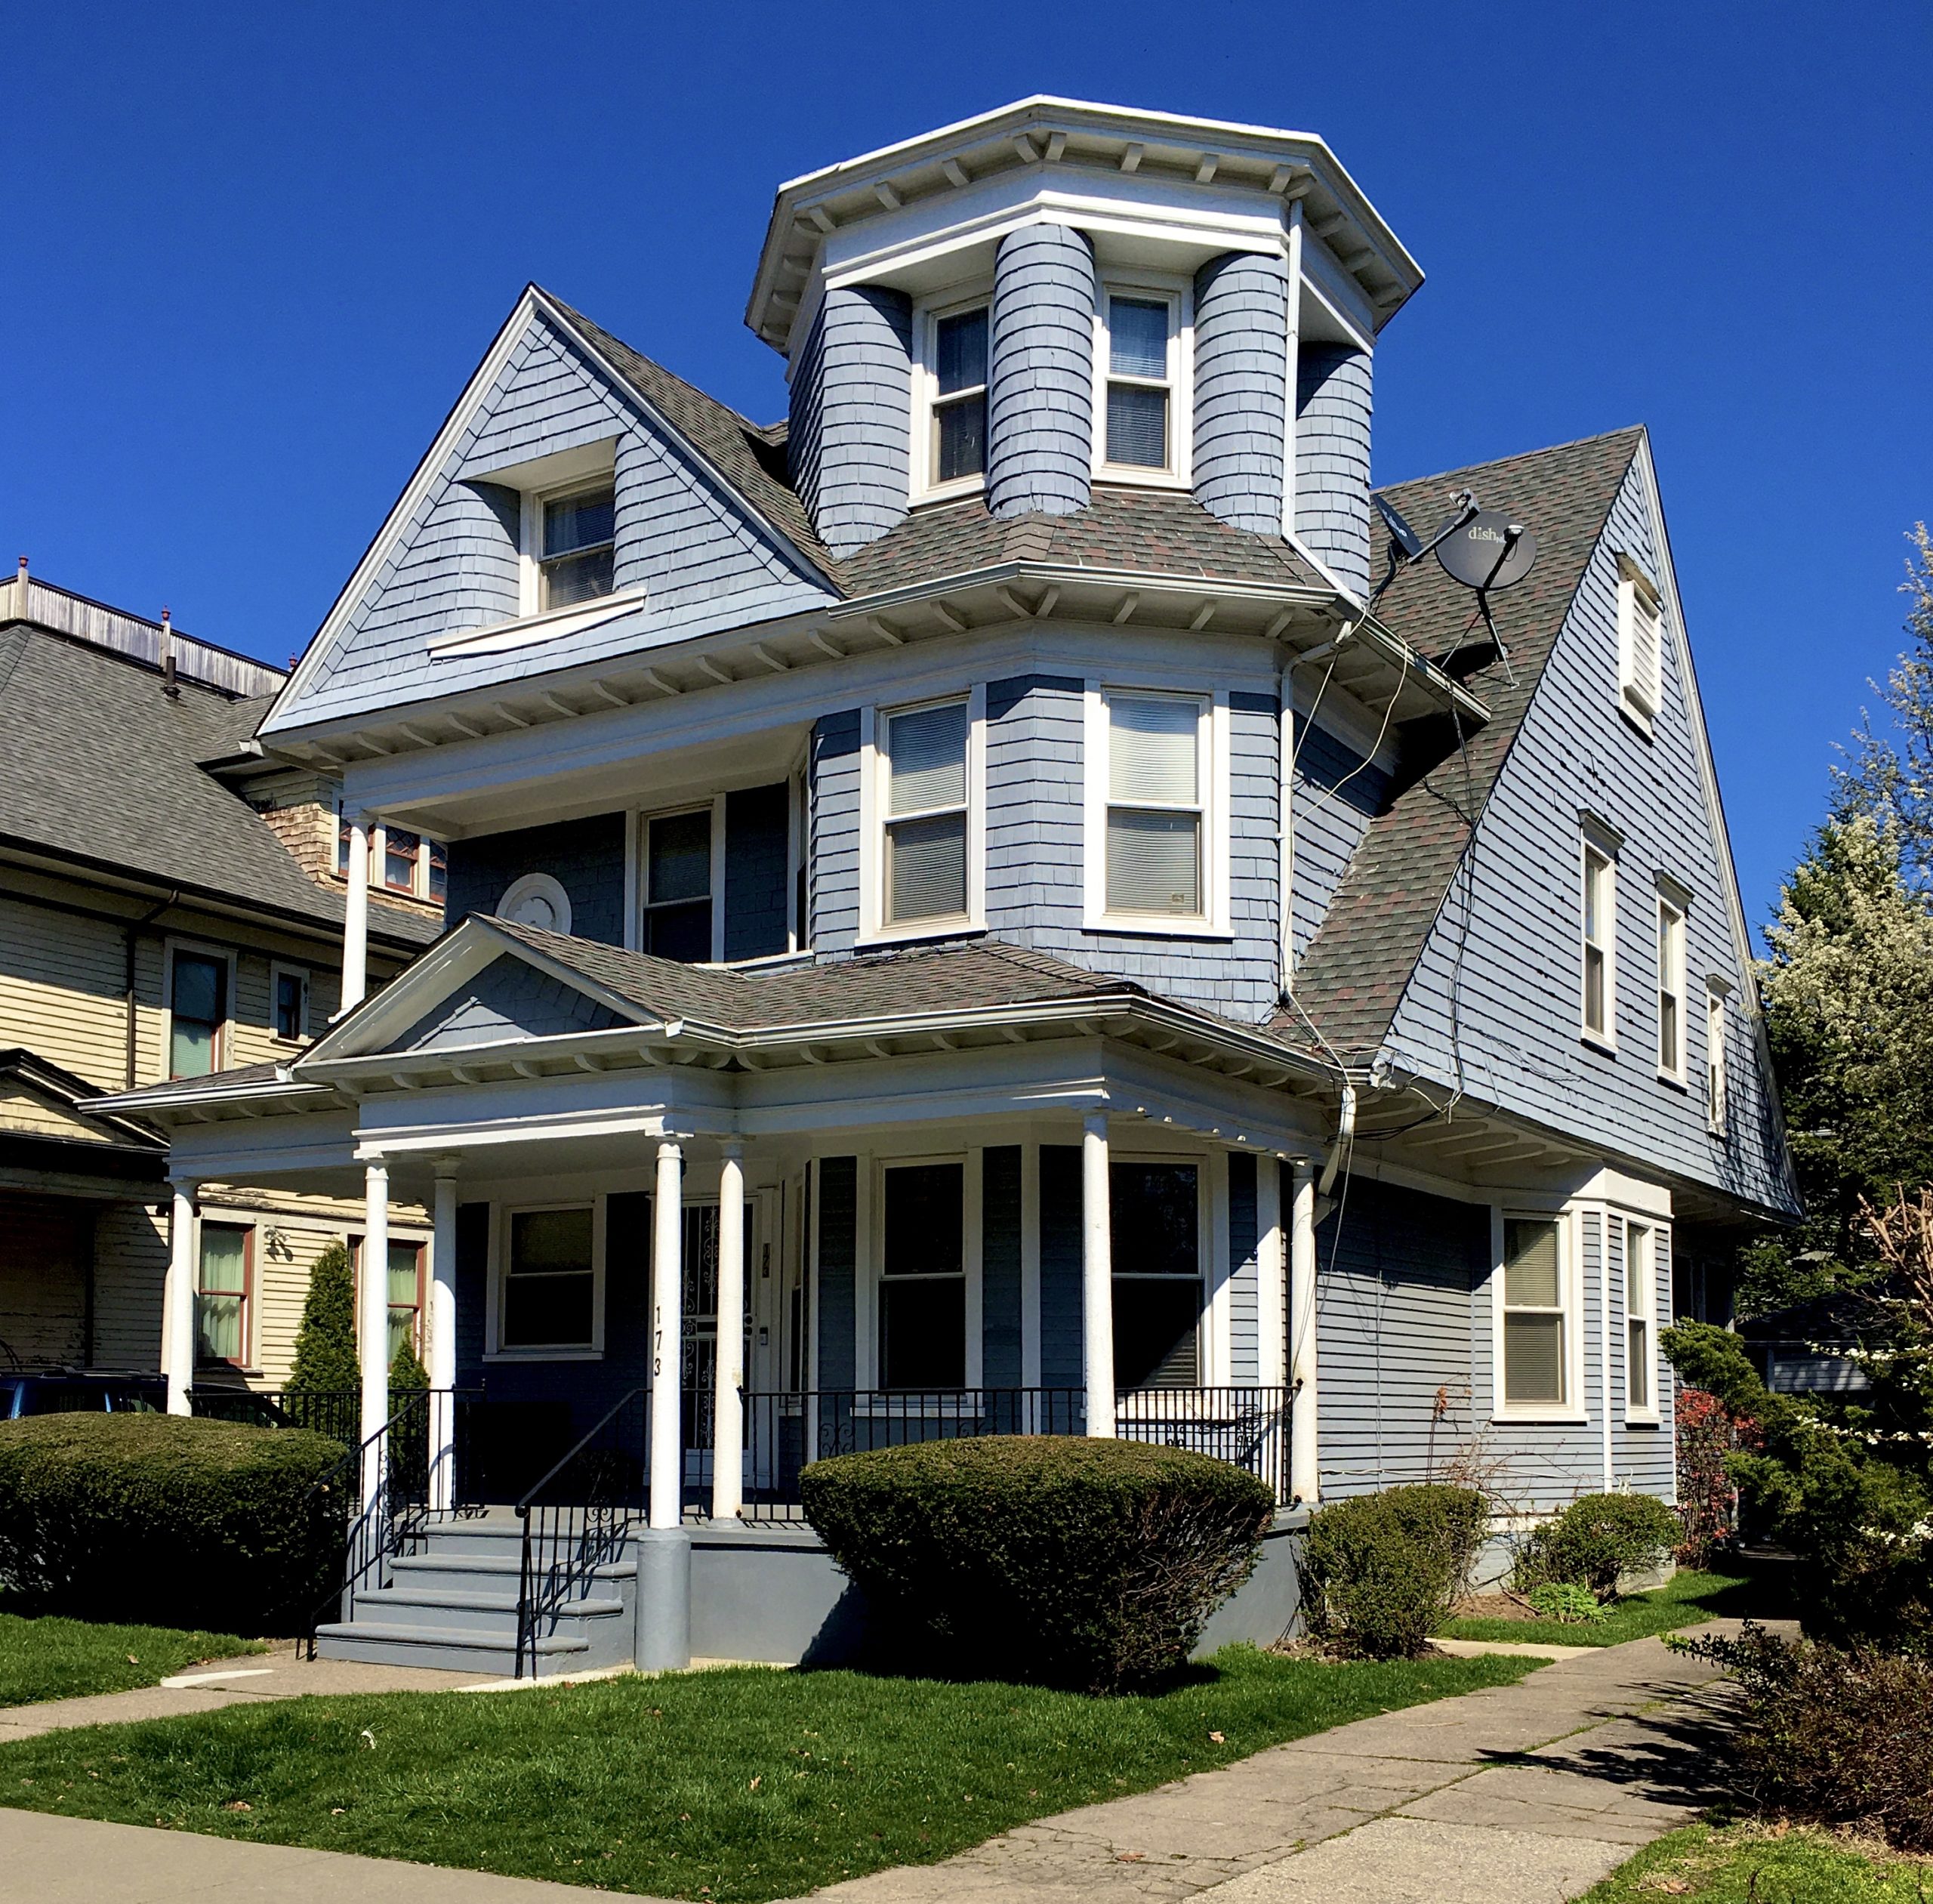 The house at 173 Westminster Road delights the eye. Photo: Lore Croghan/Brooklyn Eagle